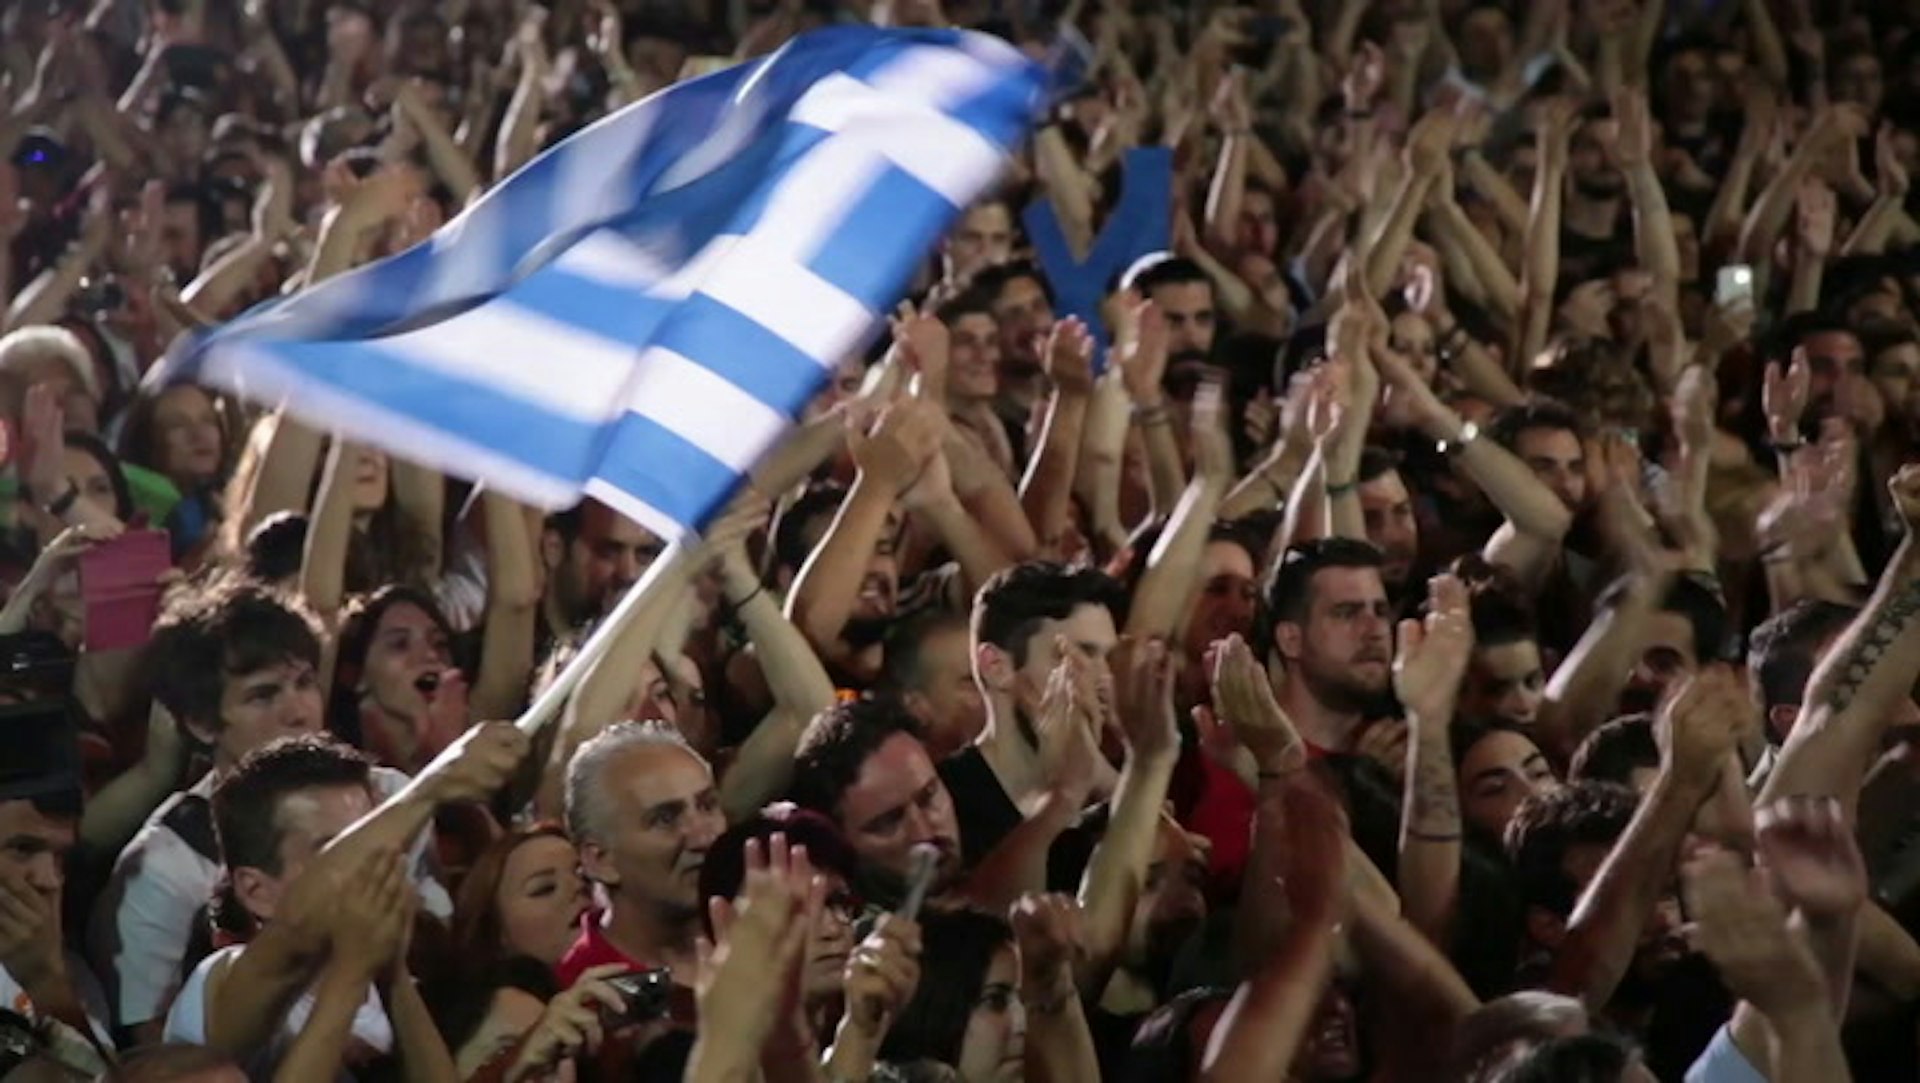 Documentary #ThisIsACoup gets inside the fierce battle between Syriza and the EU